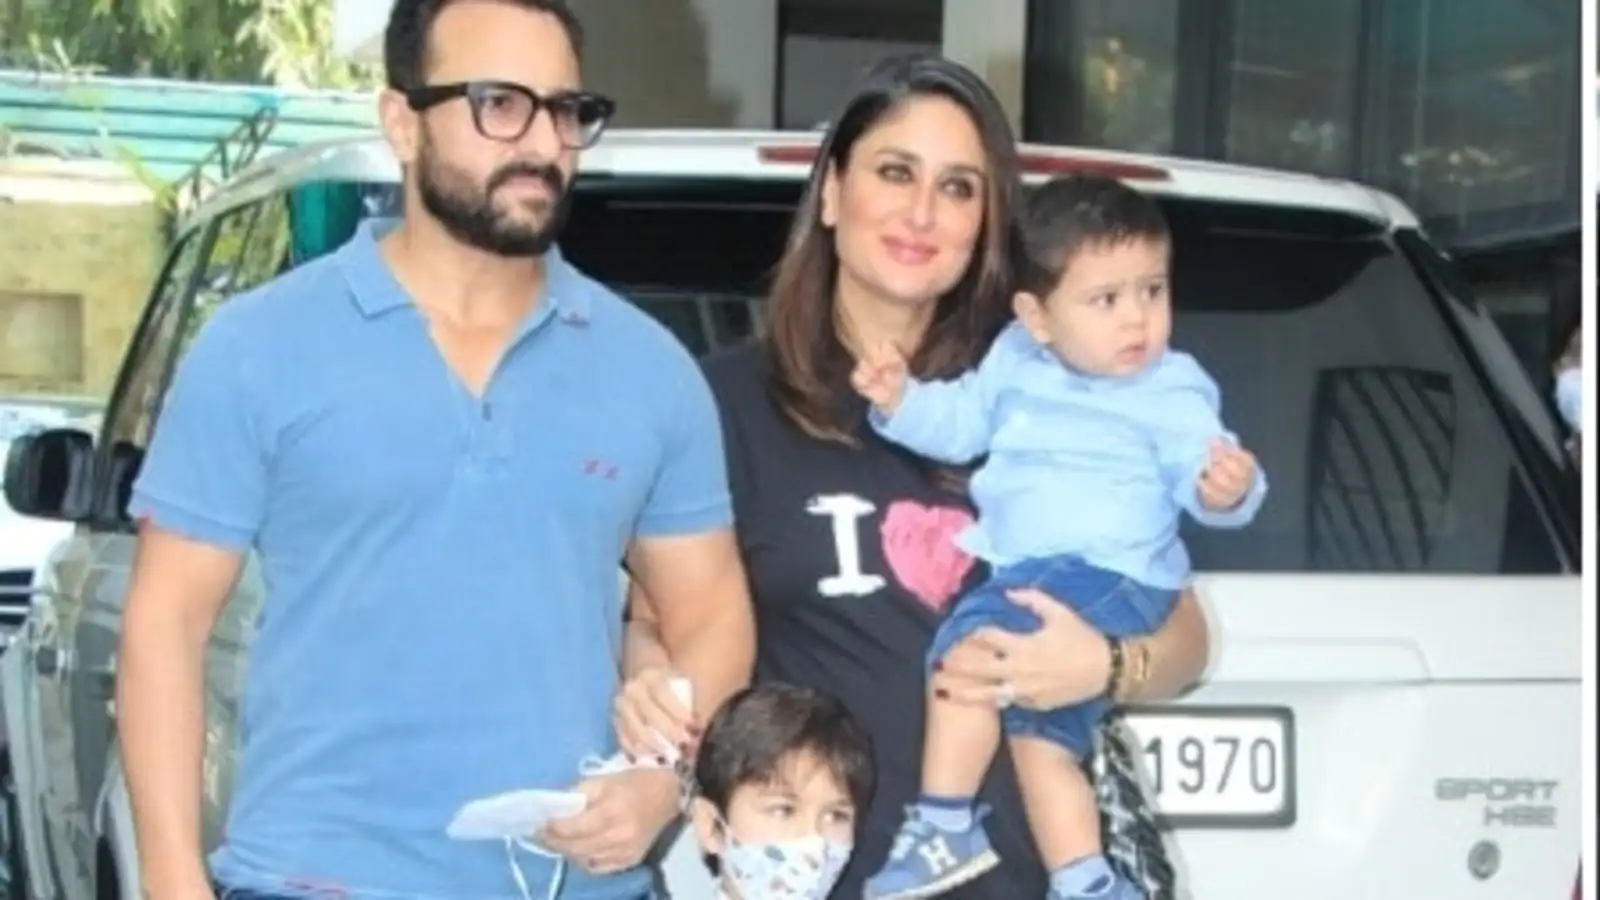 Kareena Kapoor shares why Saif Ali Khan doesn’t pose for paps like her and their kids Taimur, Jeh: ‘Now everyone knows’